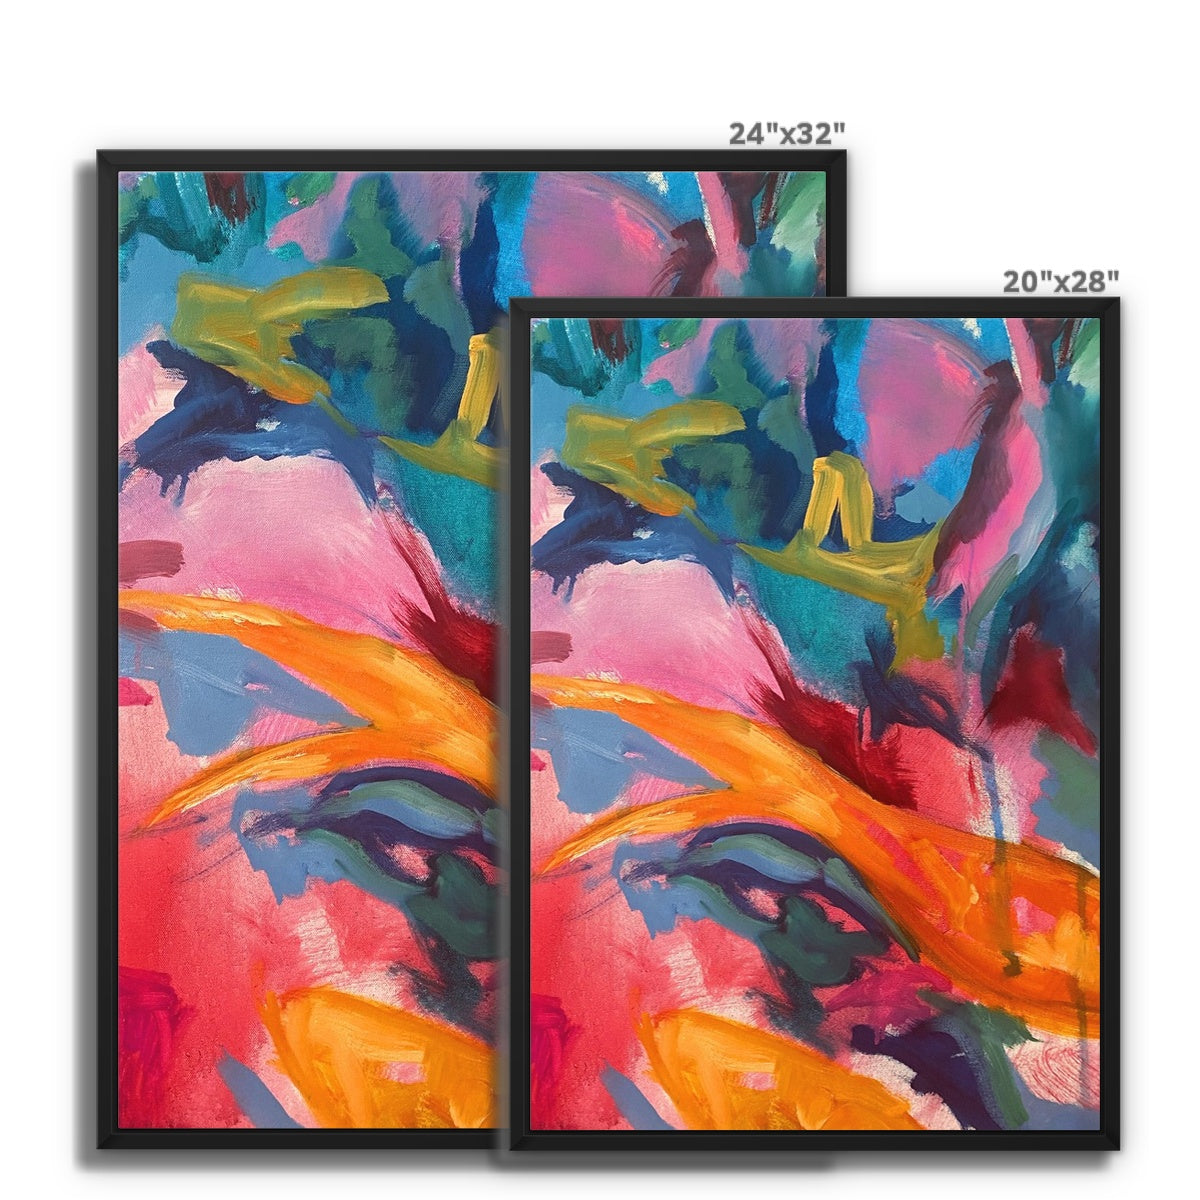 Two sizes of framed canvas prints with artwork in colourful abstract art style in landscape format sizes 24"x 32" and 20 inch x 28" inches.